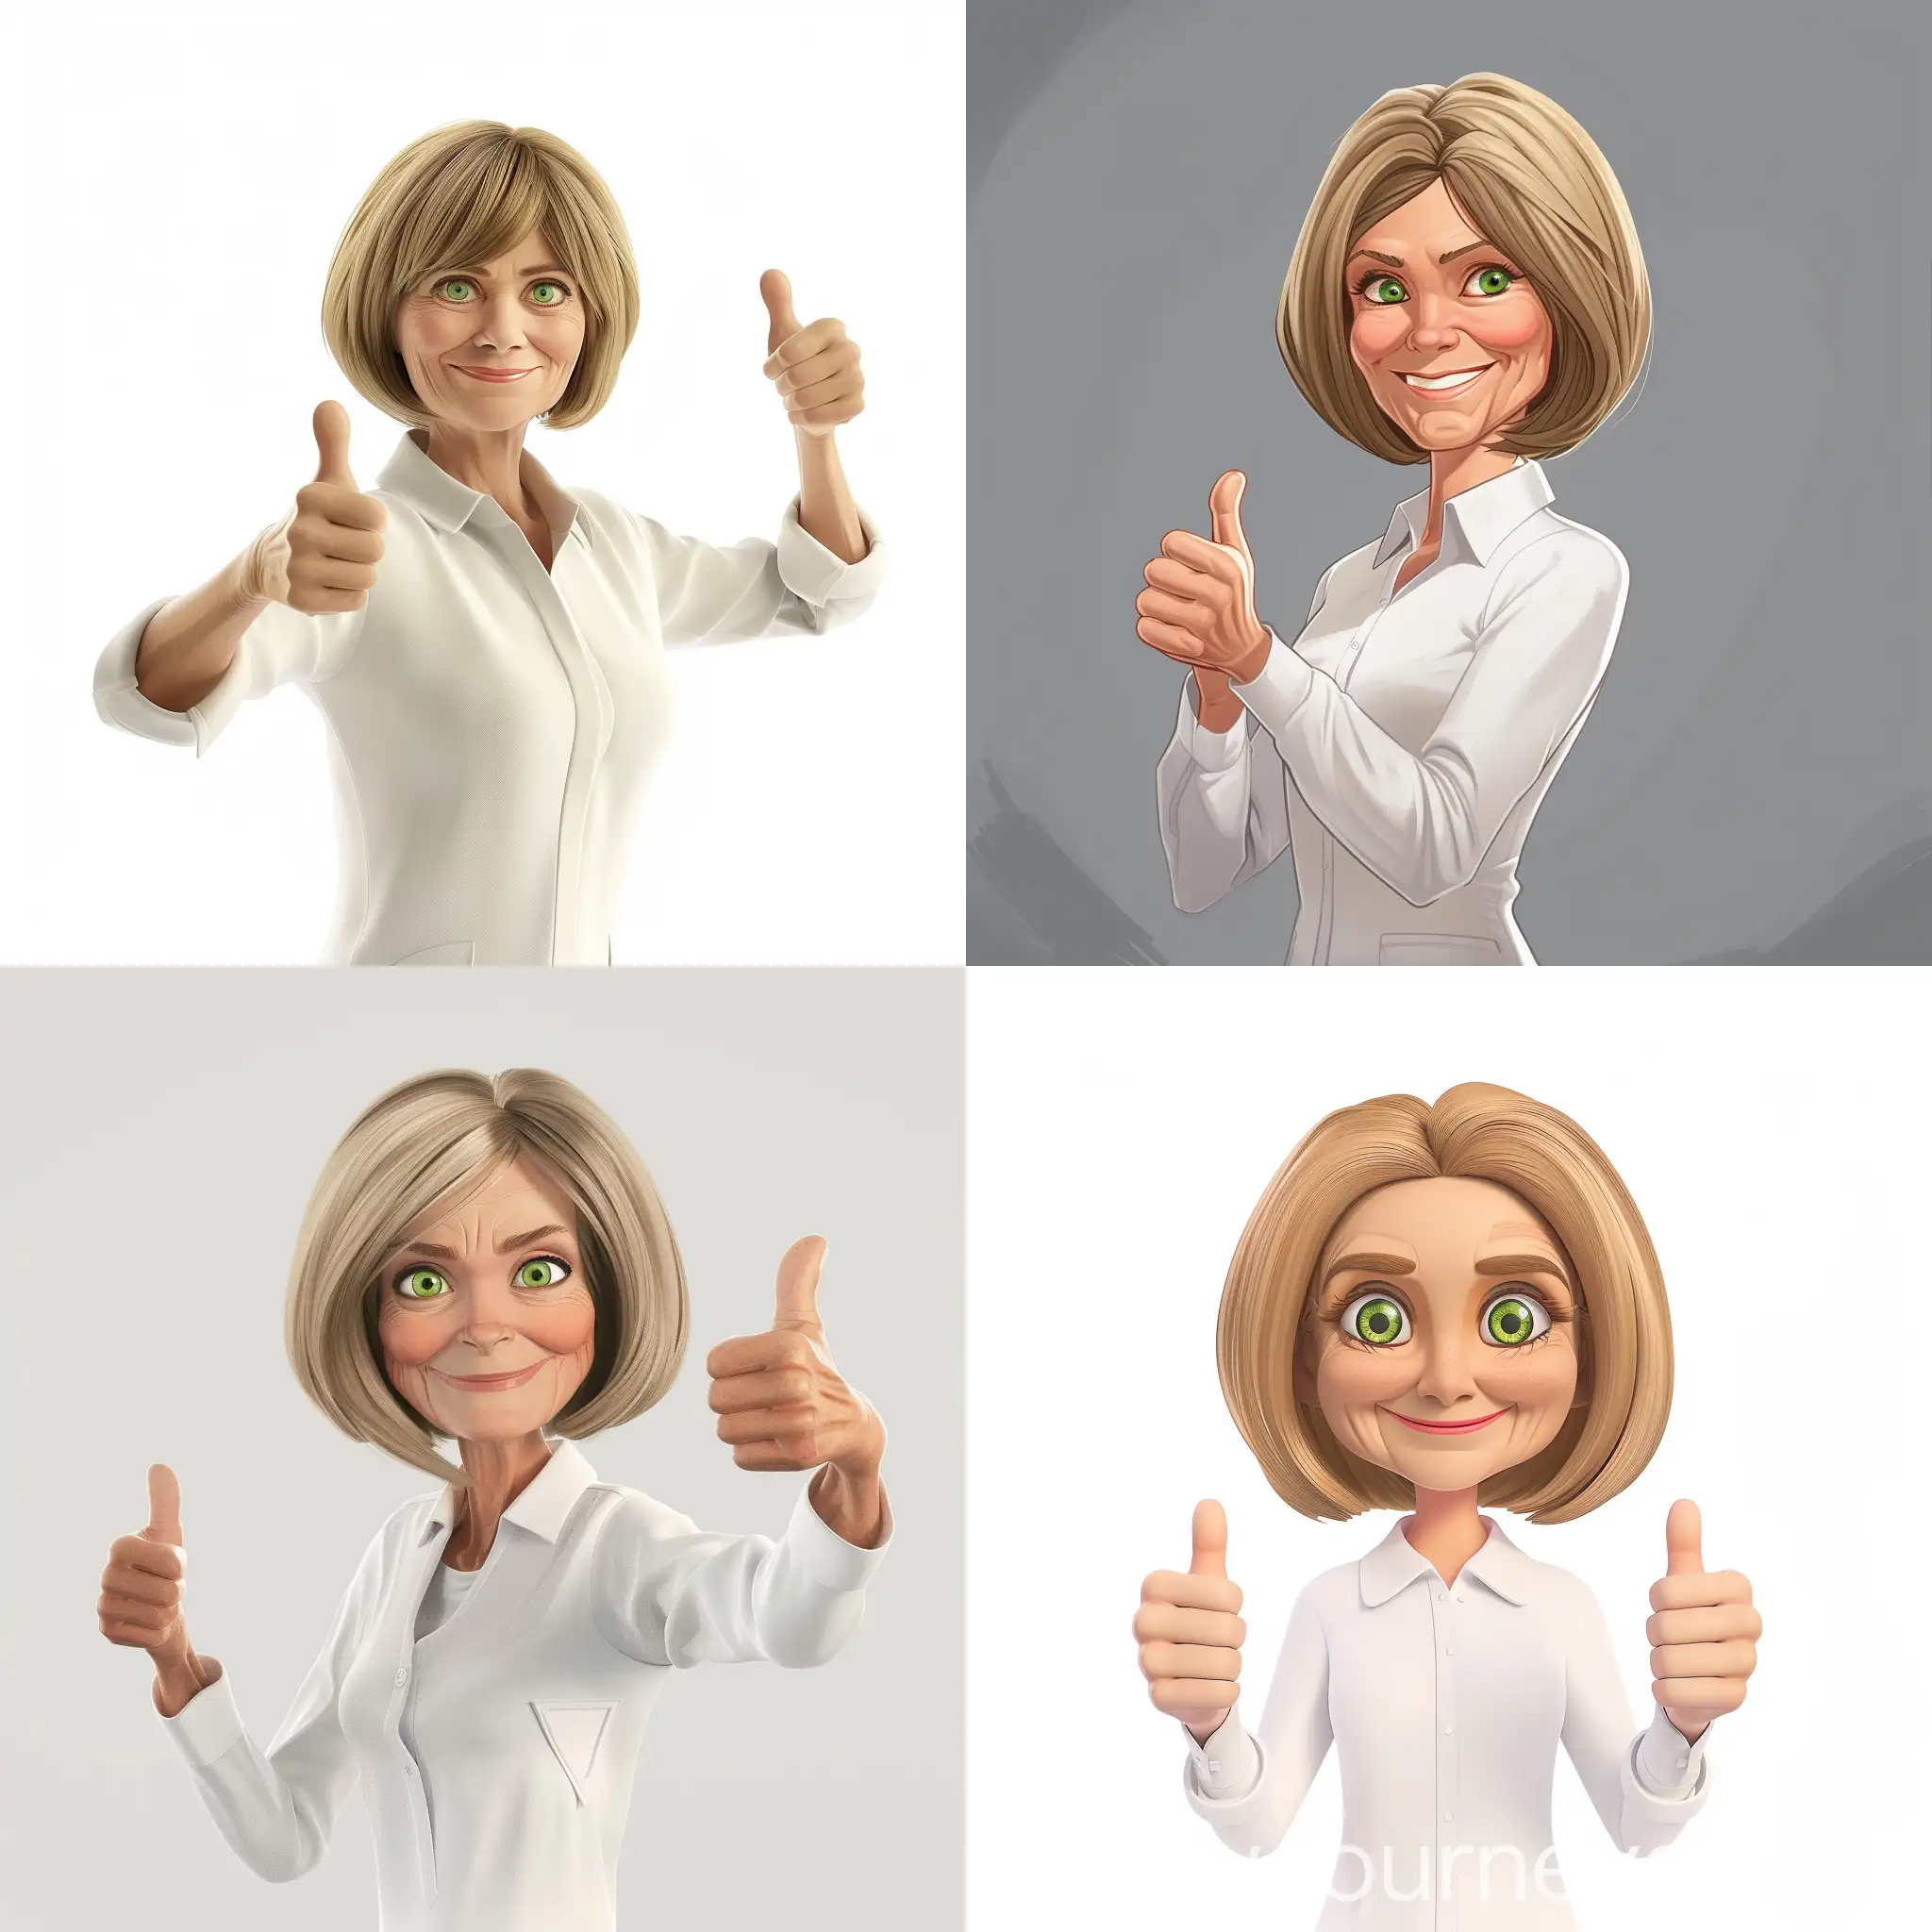 pixar style character, middle age woman, bob style blonde hair, green eyes, giving thumbs up, smiling, white shirt, full body shot